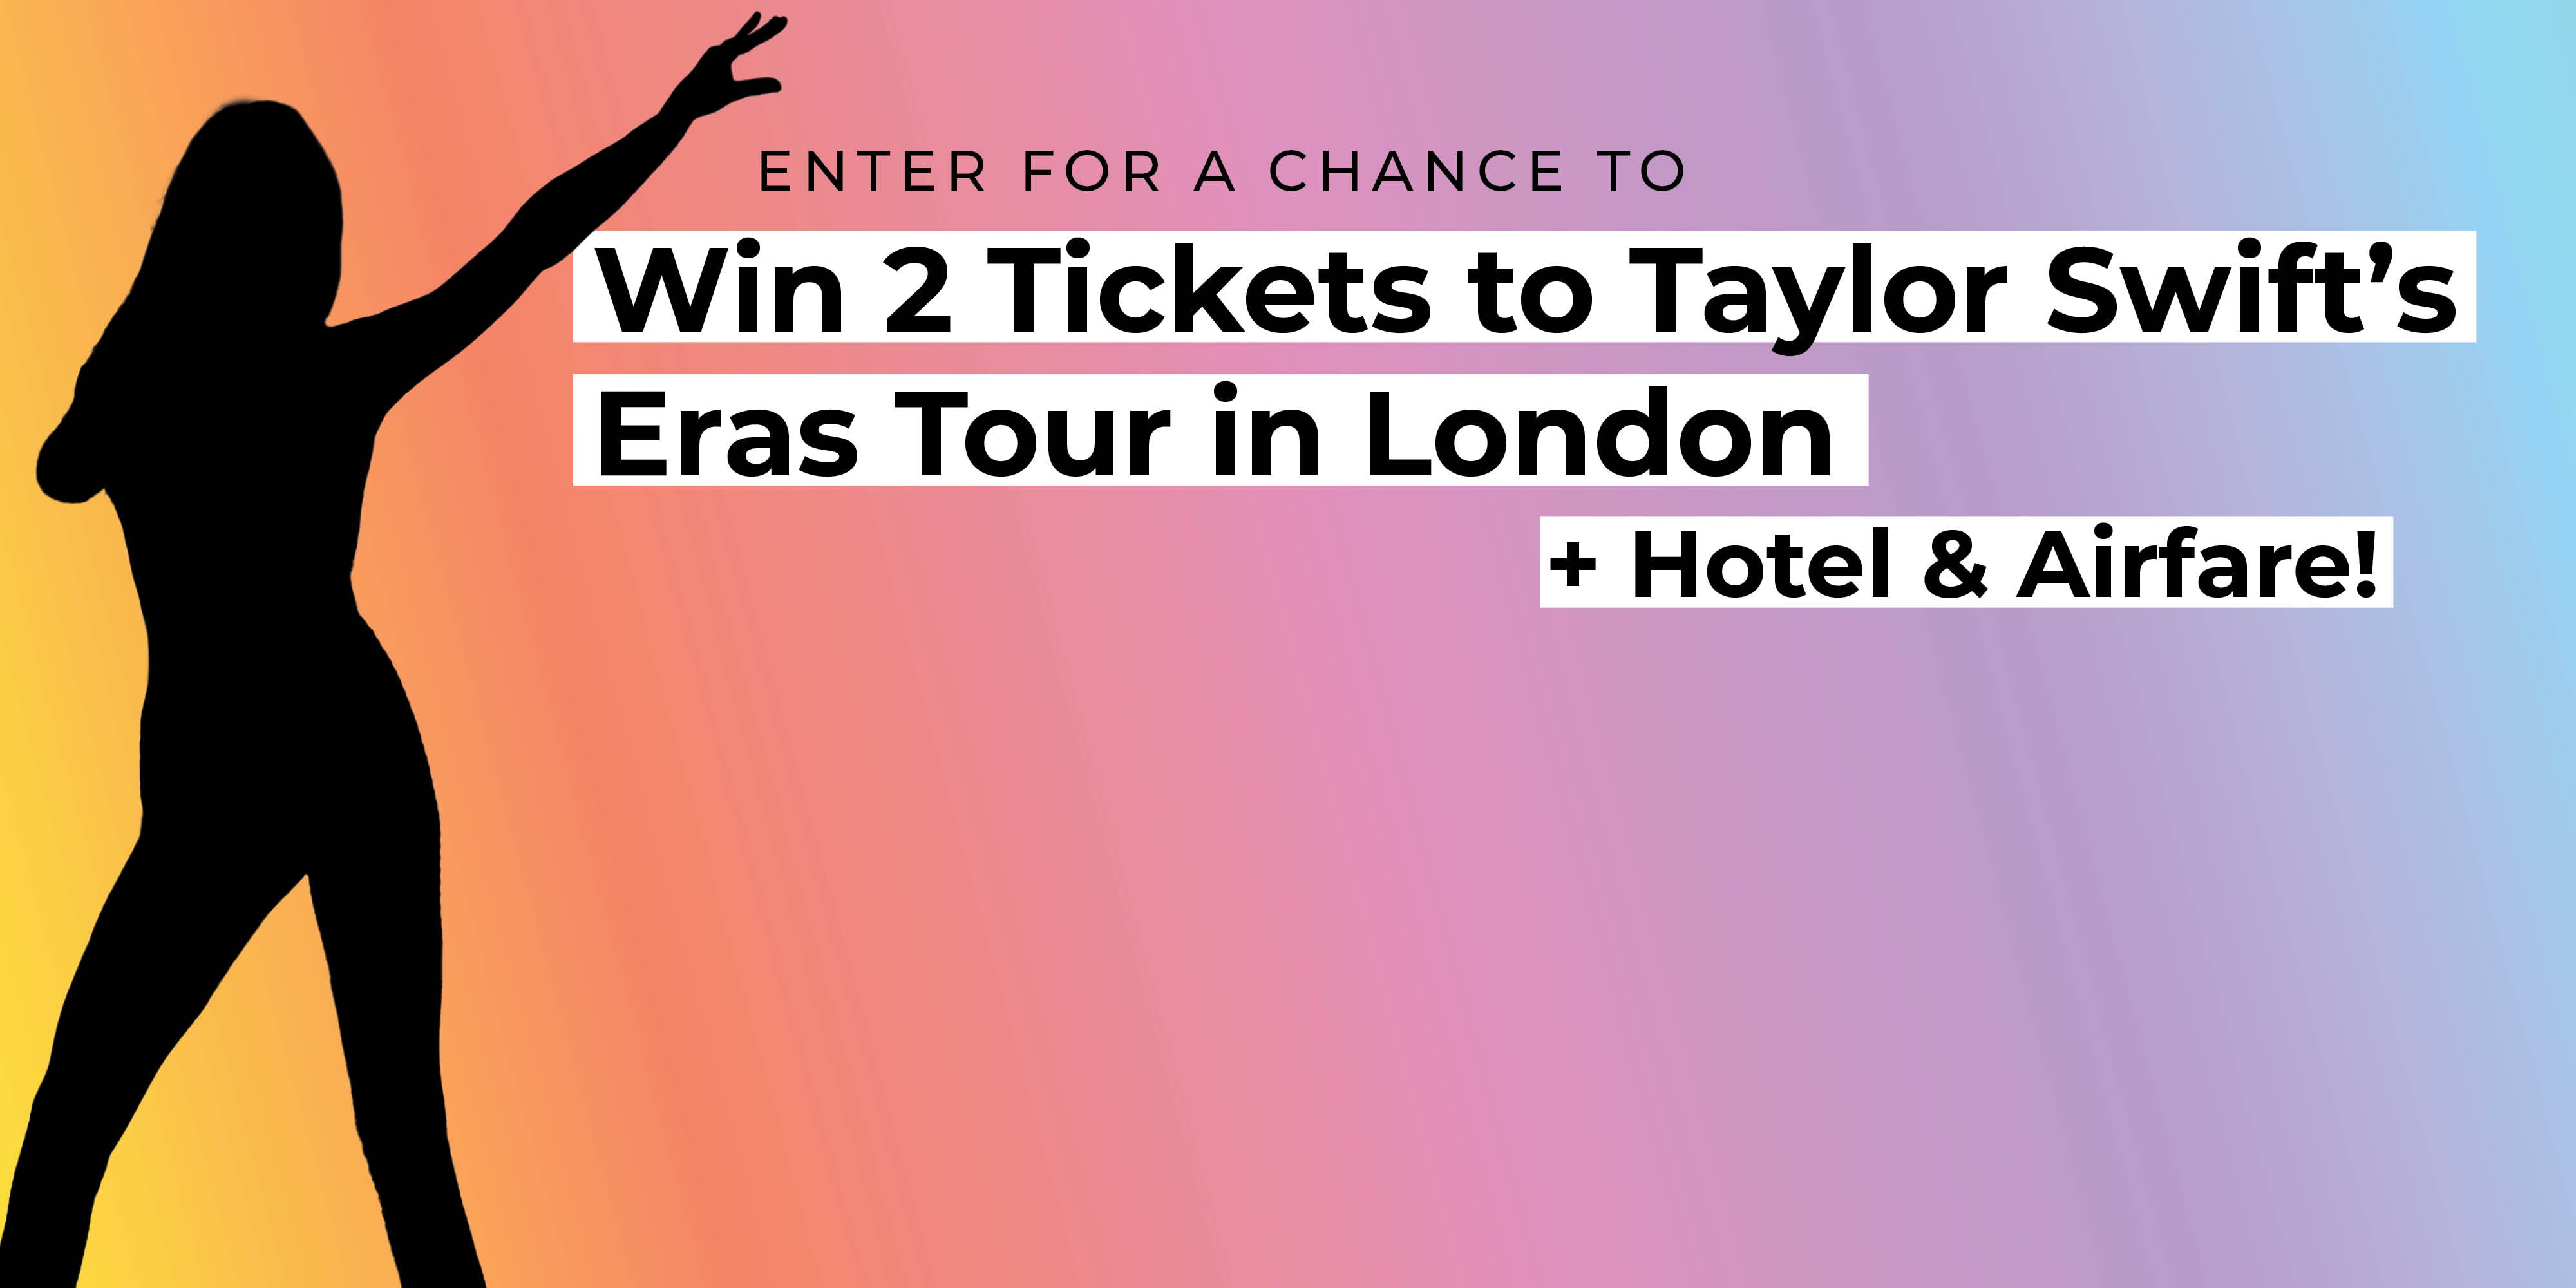 Win 2 Tickets to Taylor Swift's Eras Tour in London + Hotel & Airfare!